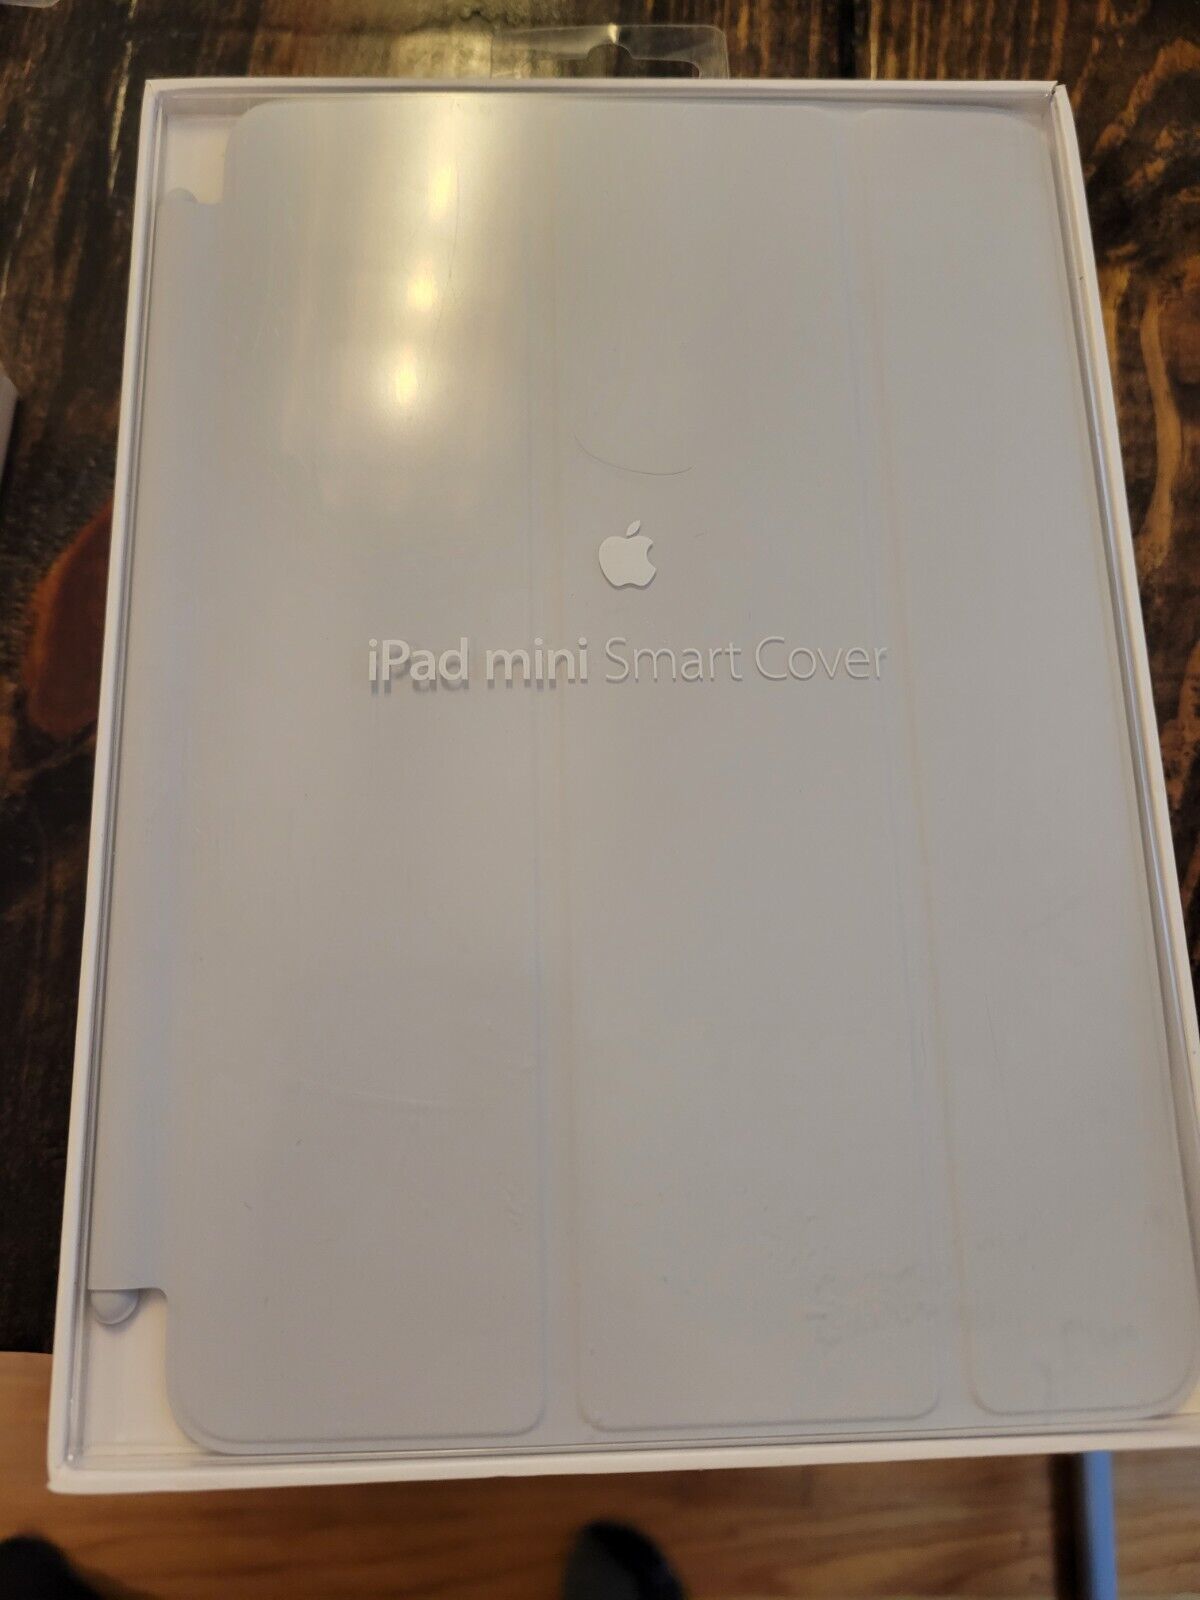 NEW IN PACKAGE 100%  AUTHENTIC APPLE IPAD MINI SMART COVER Light GRAY MD967LL/A